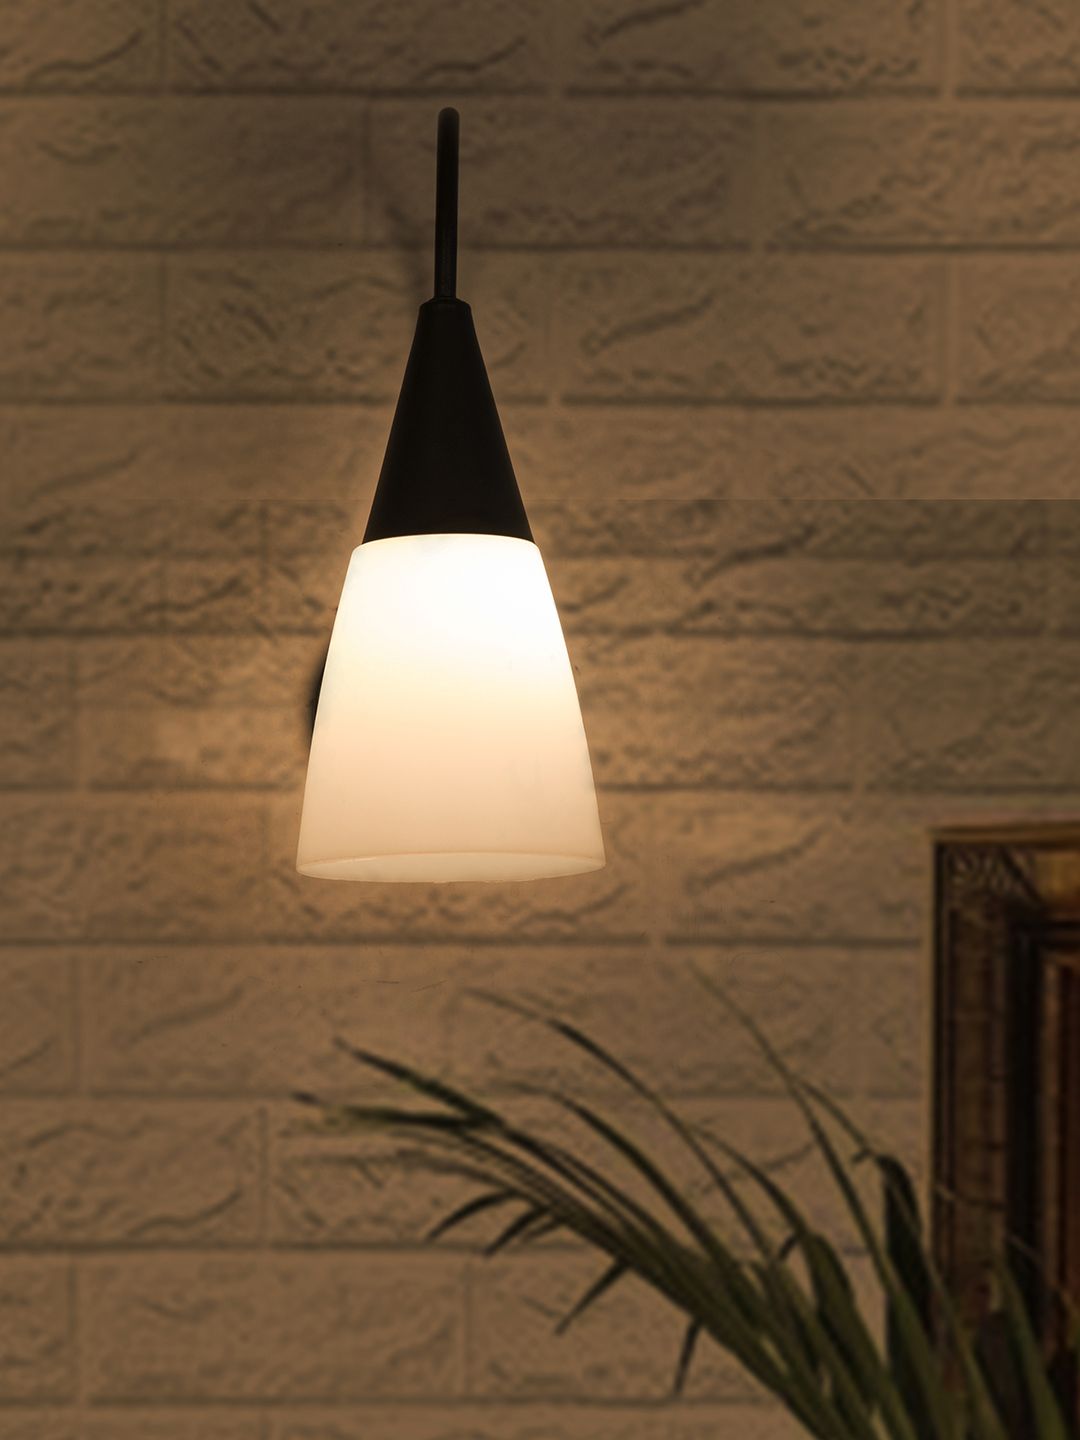 Fos Lighting Unbreakable Modern Conical Wall Lamp Price in India